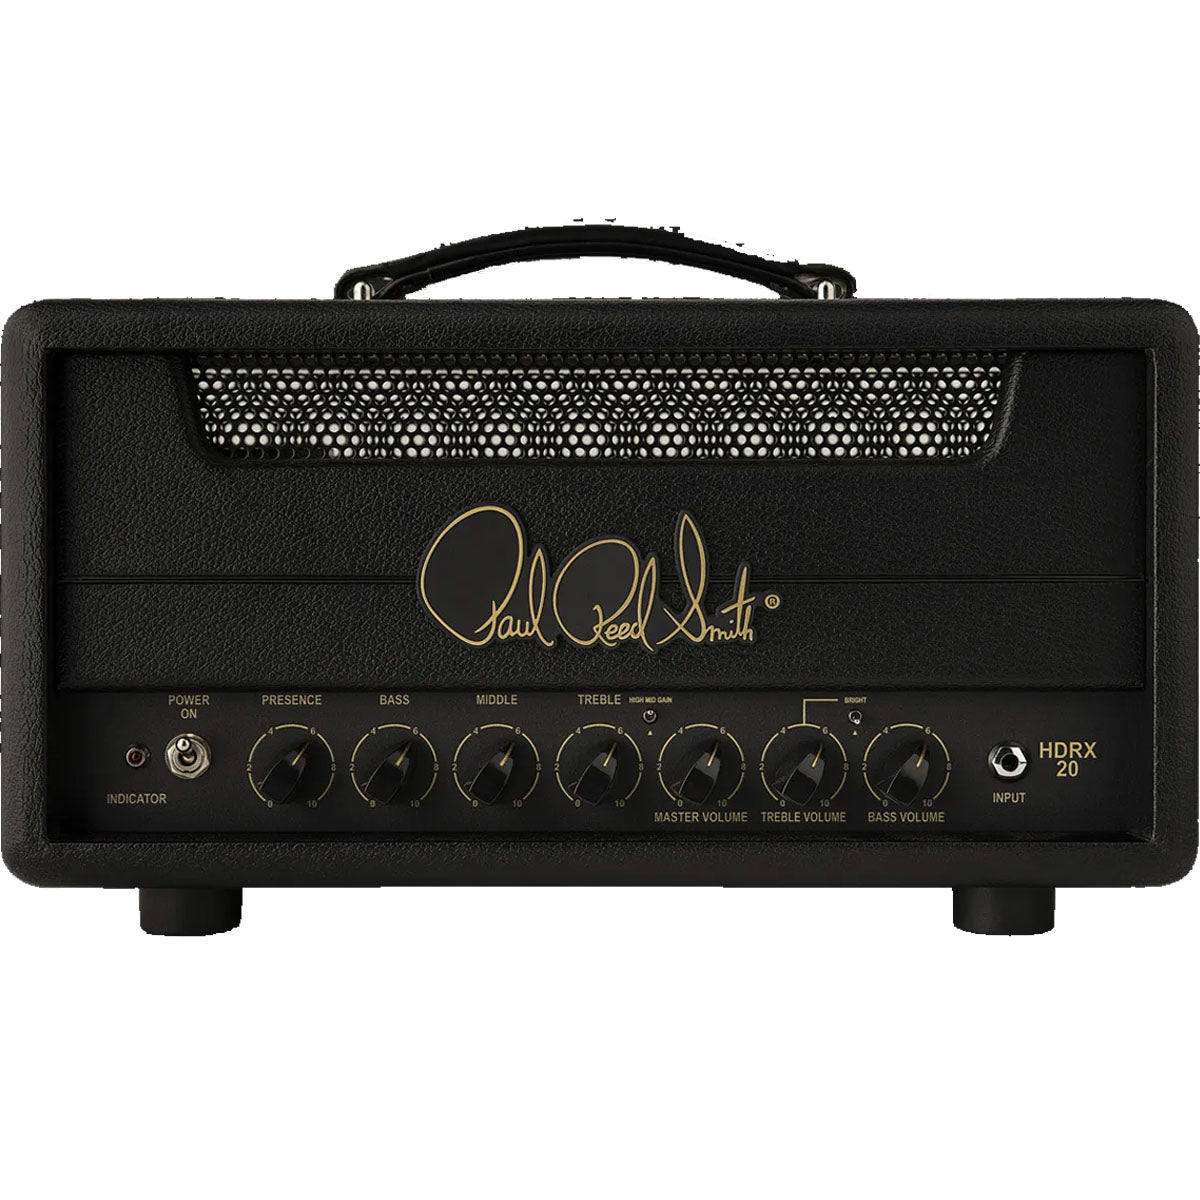 PRS Paul Reed Smith HDRX20 Guitar Amplifier Head 20w Amp